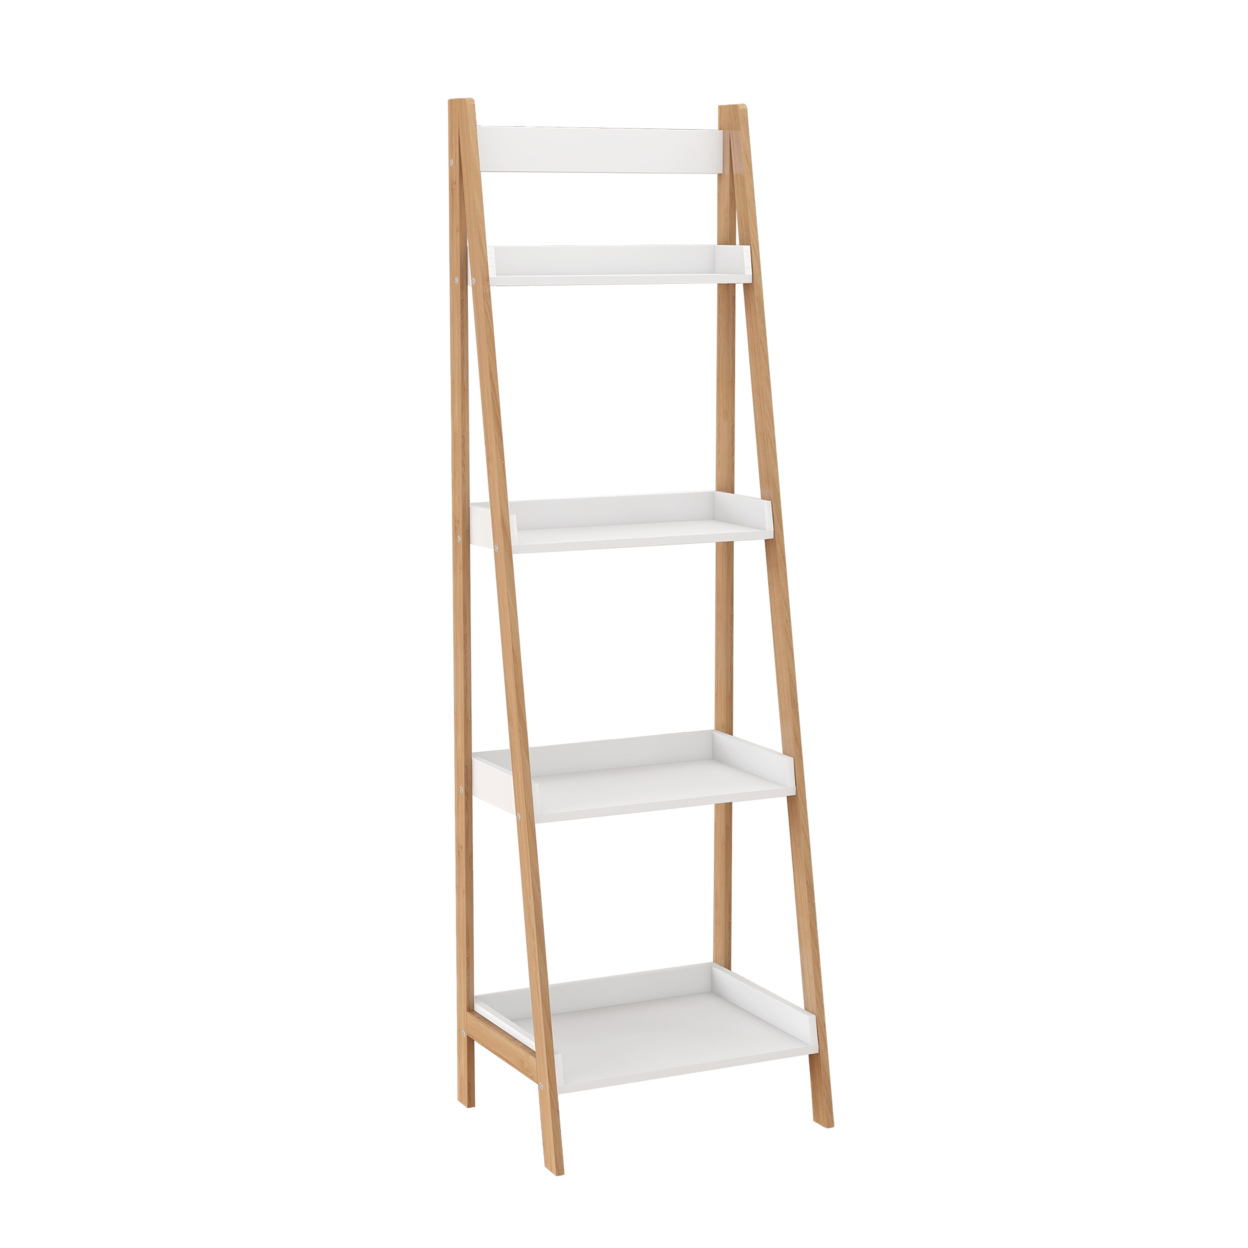 4 Tier Bookshelf With Ladder Style And Raised Edges, White And Brown- Saltoro Sherpi